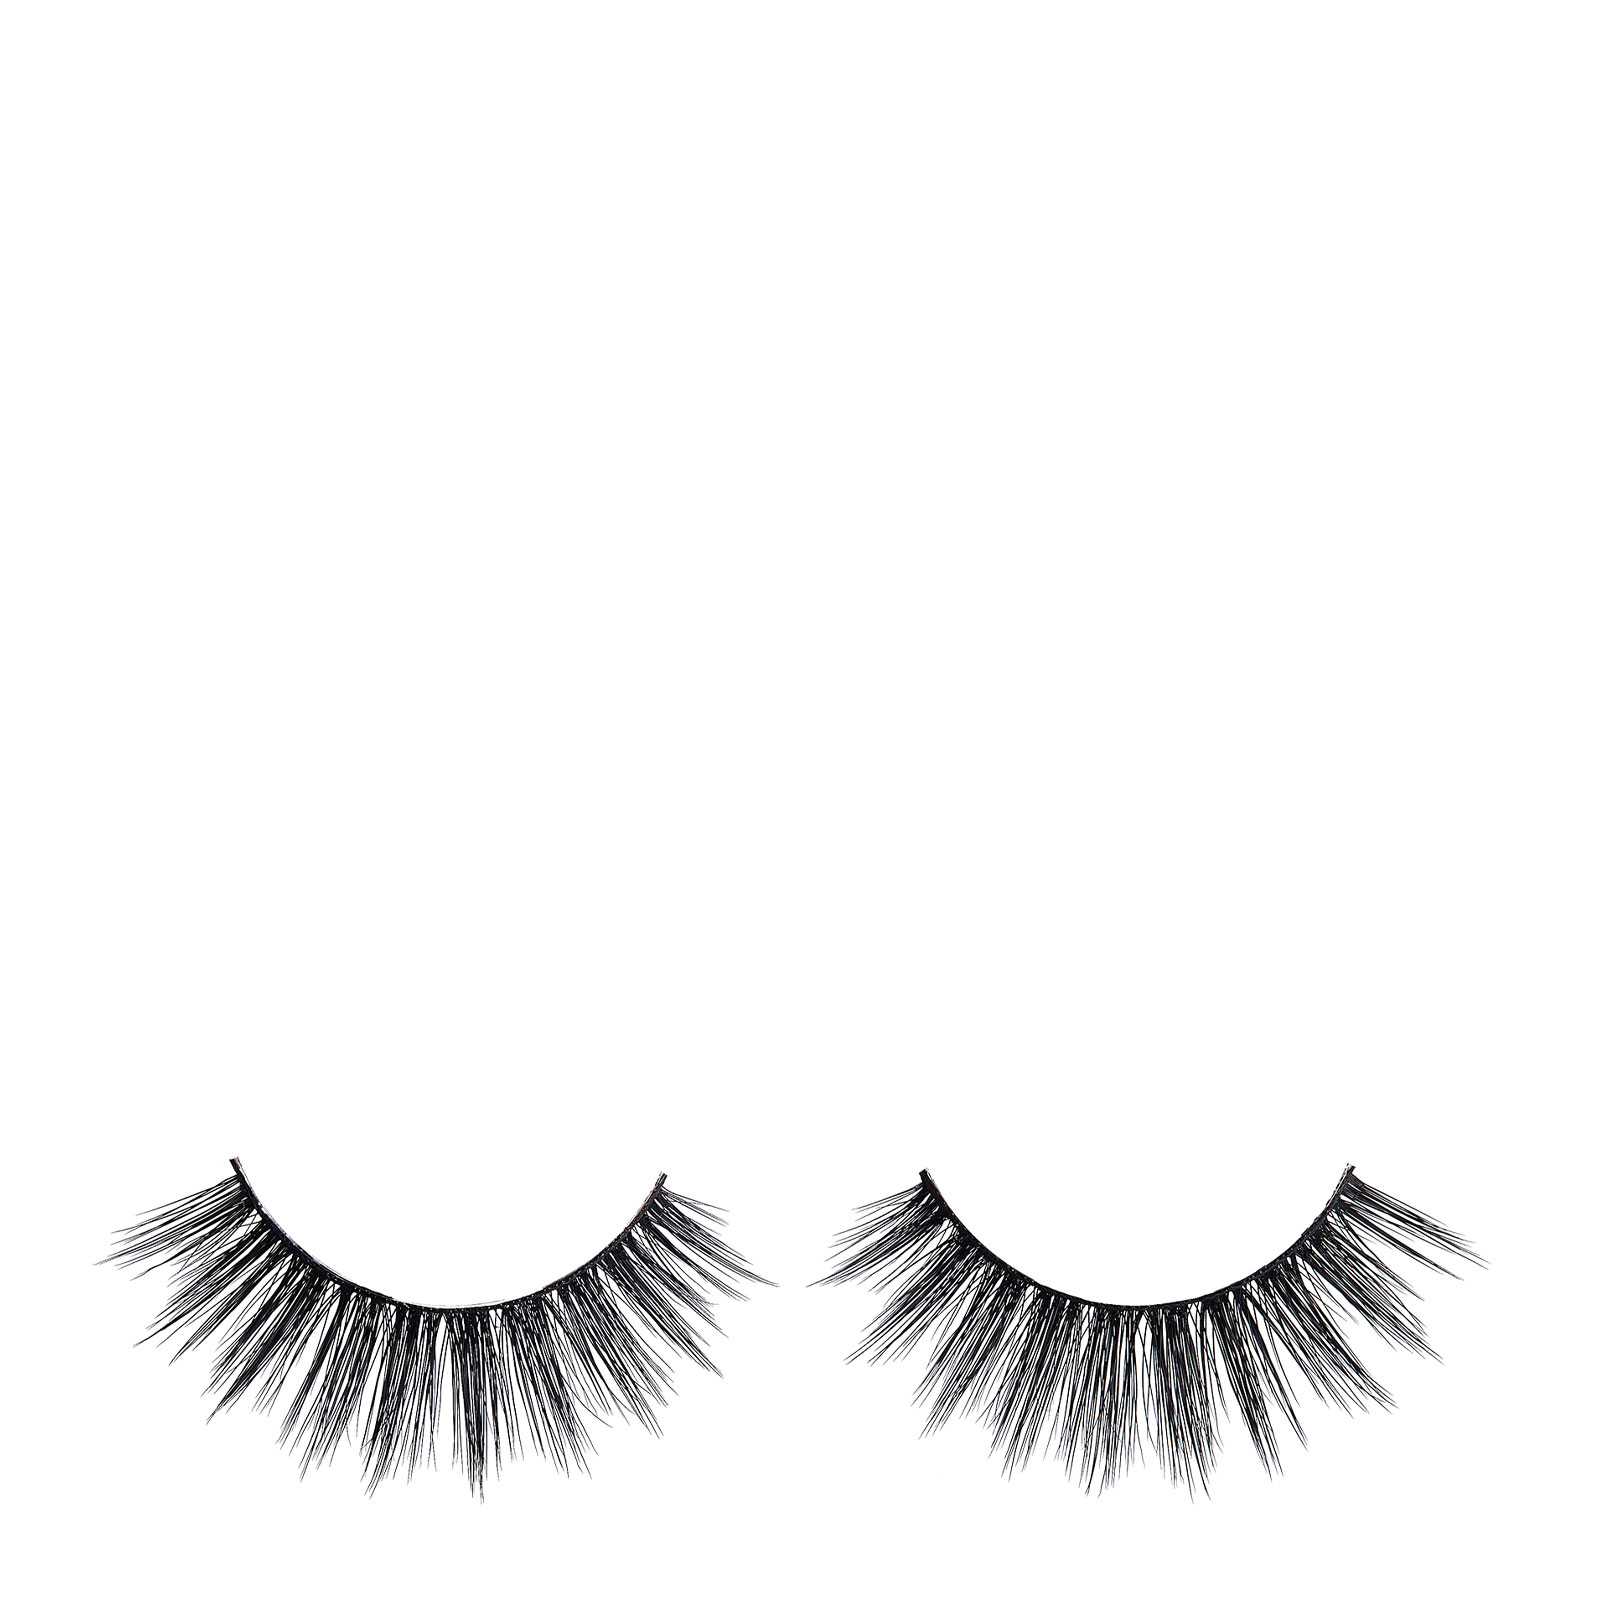 Sigma Beauty False Lashes Sultry